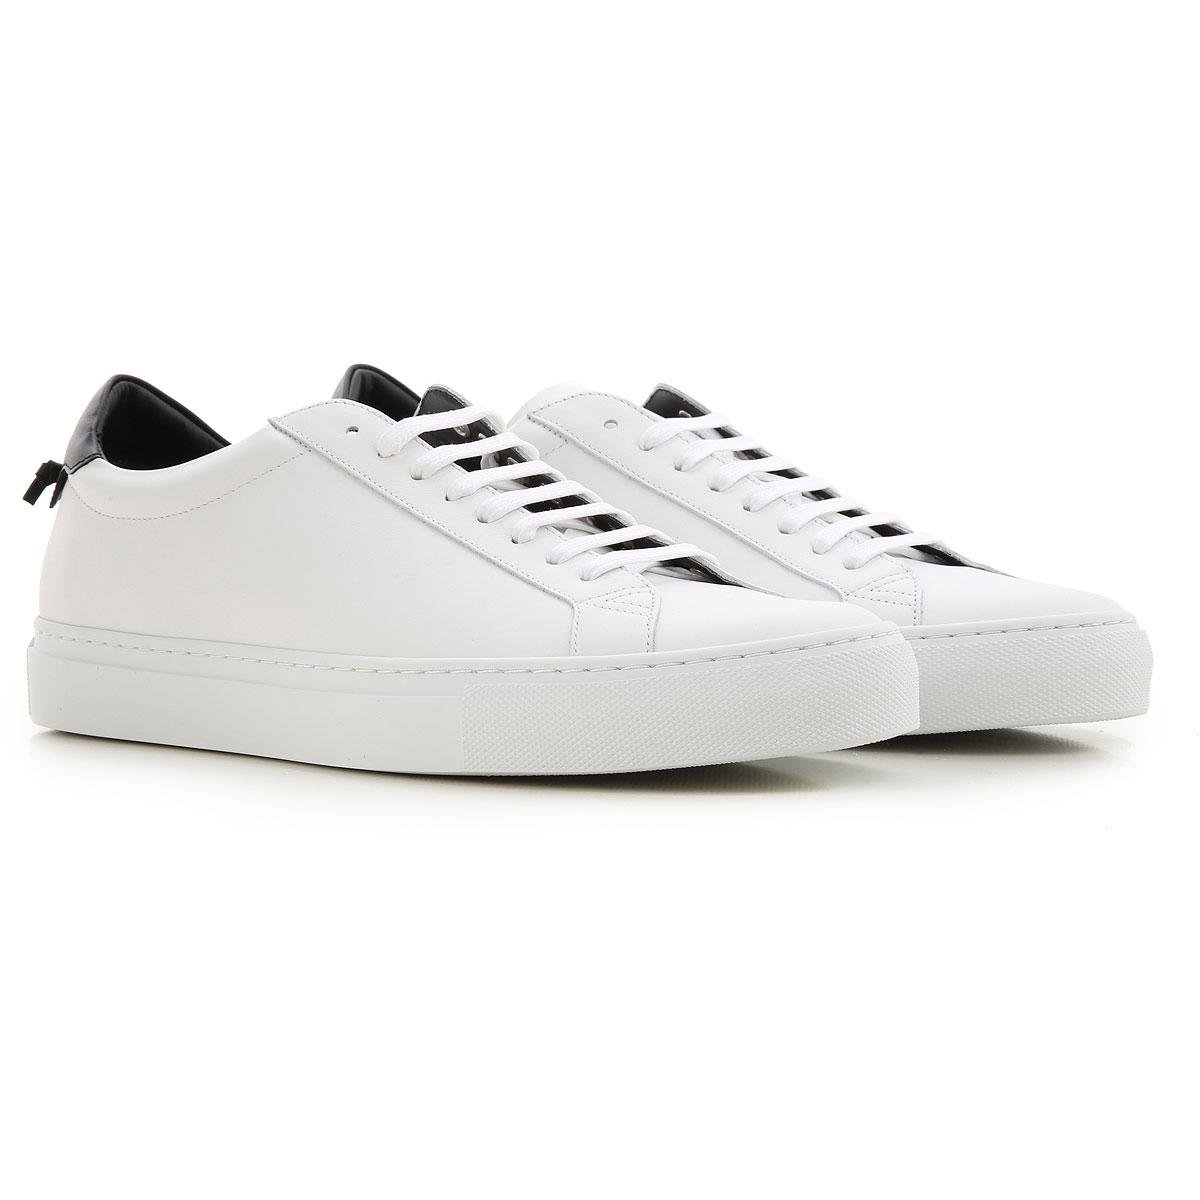 Givenchy Sneakers For Men in White for Men - Save 27% - Lyst